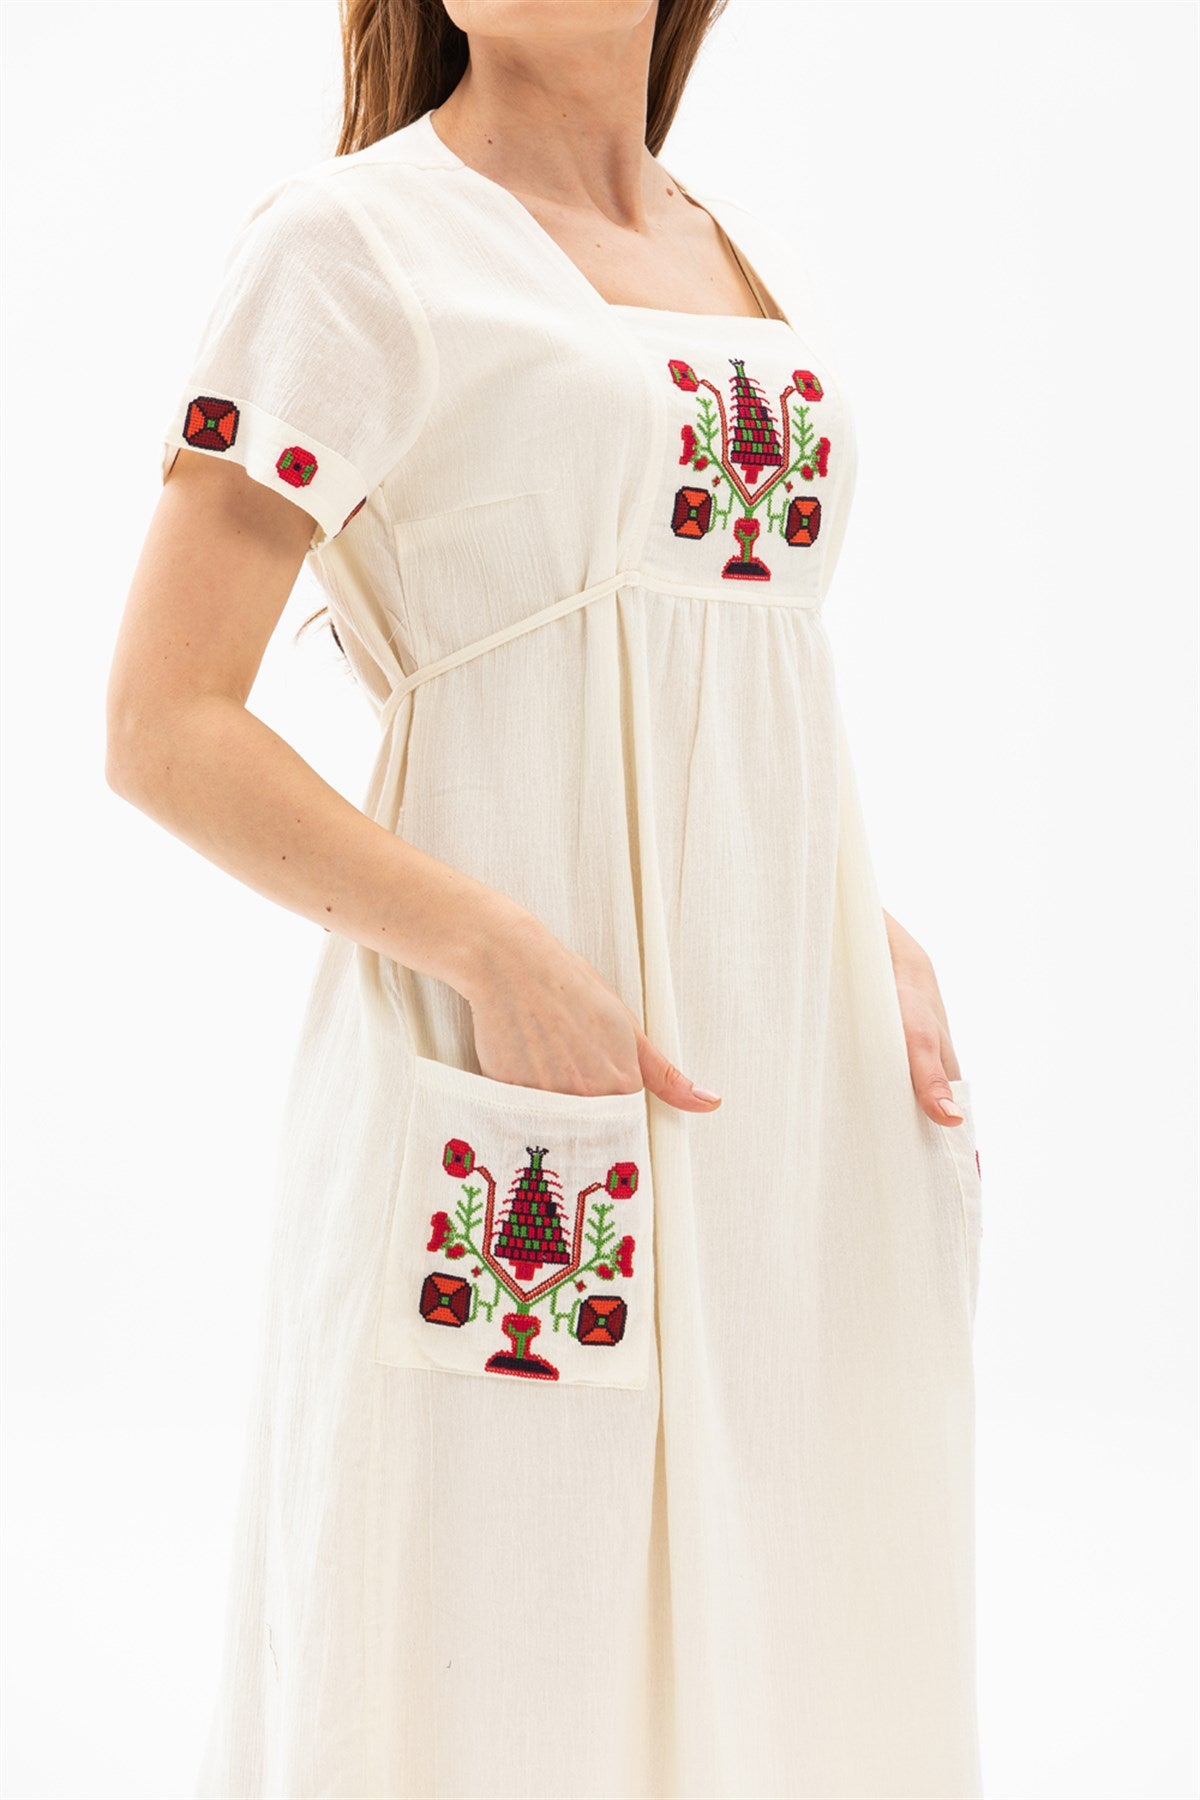 Short Sleeve Ethnic Embroidered Long Dress Made of Sile Cloth